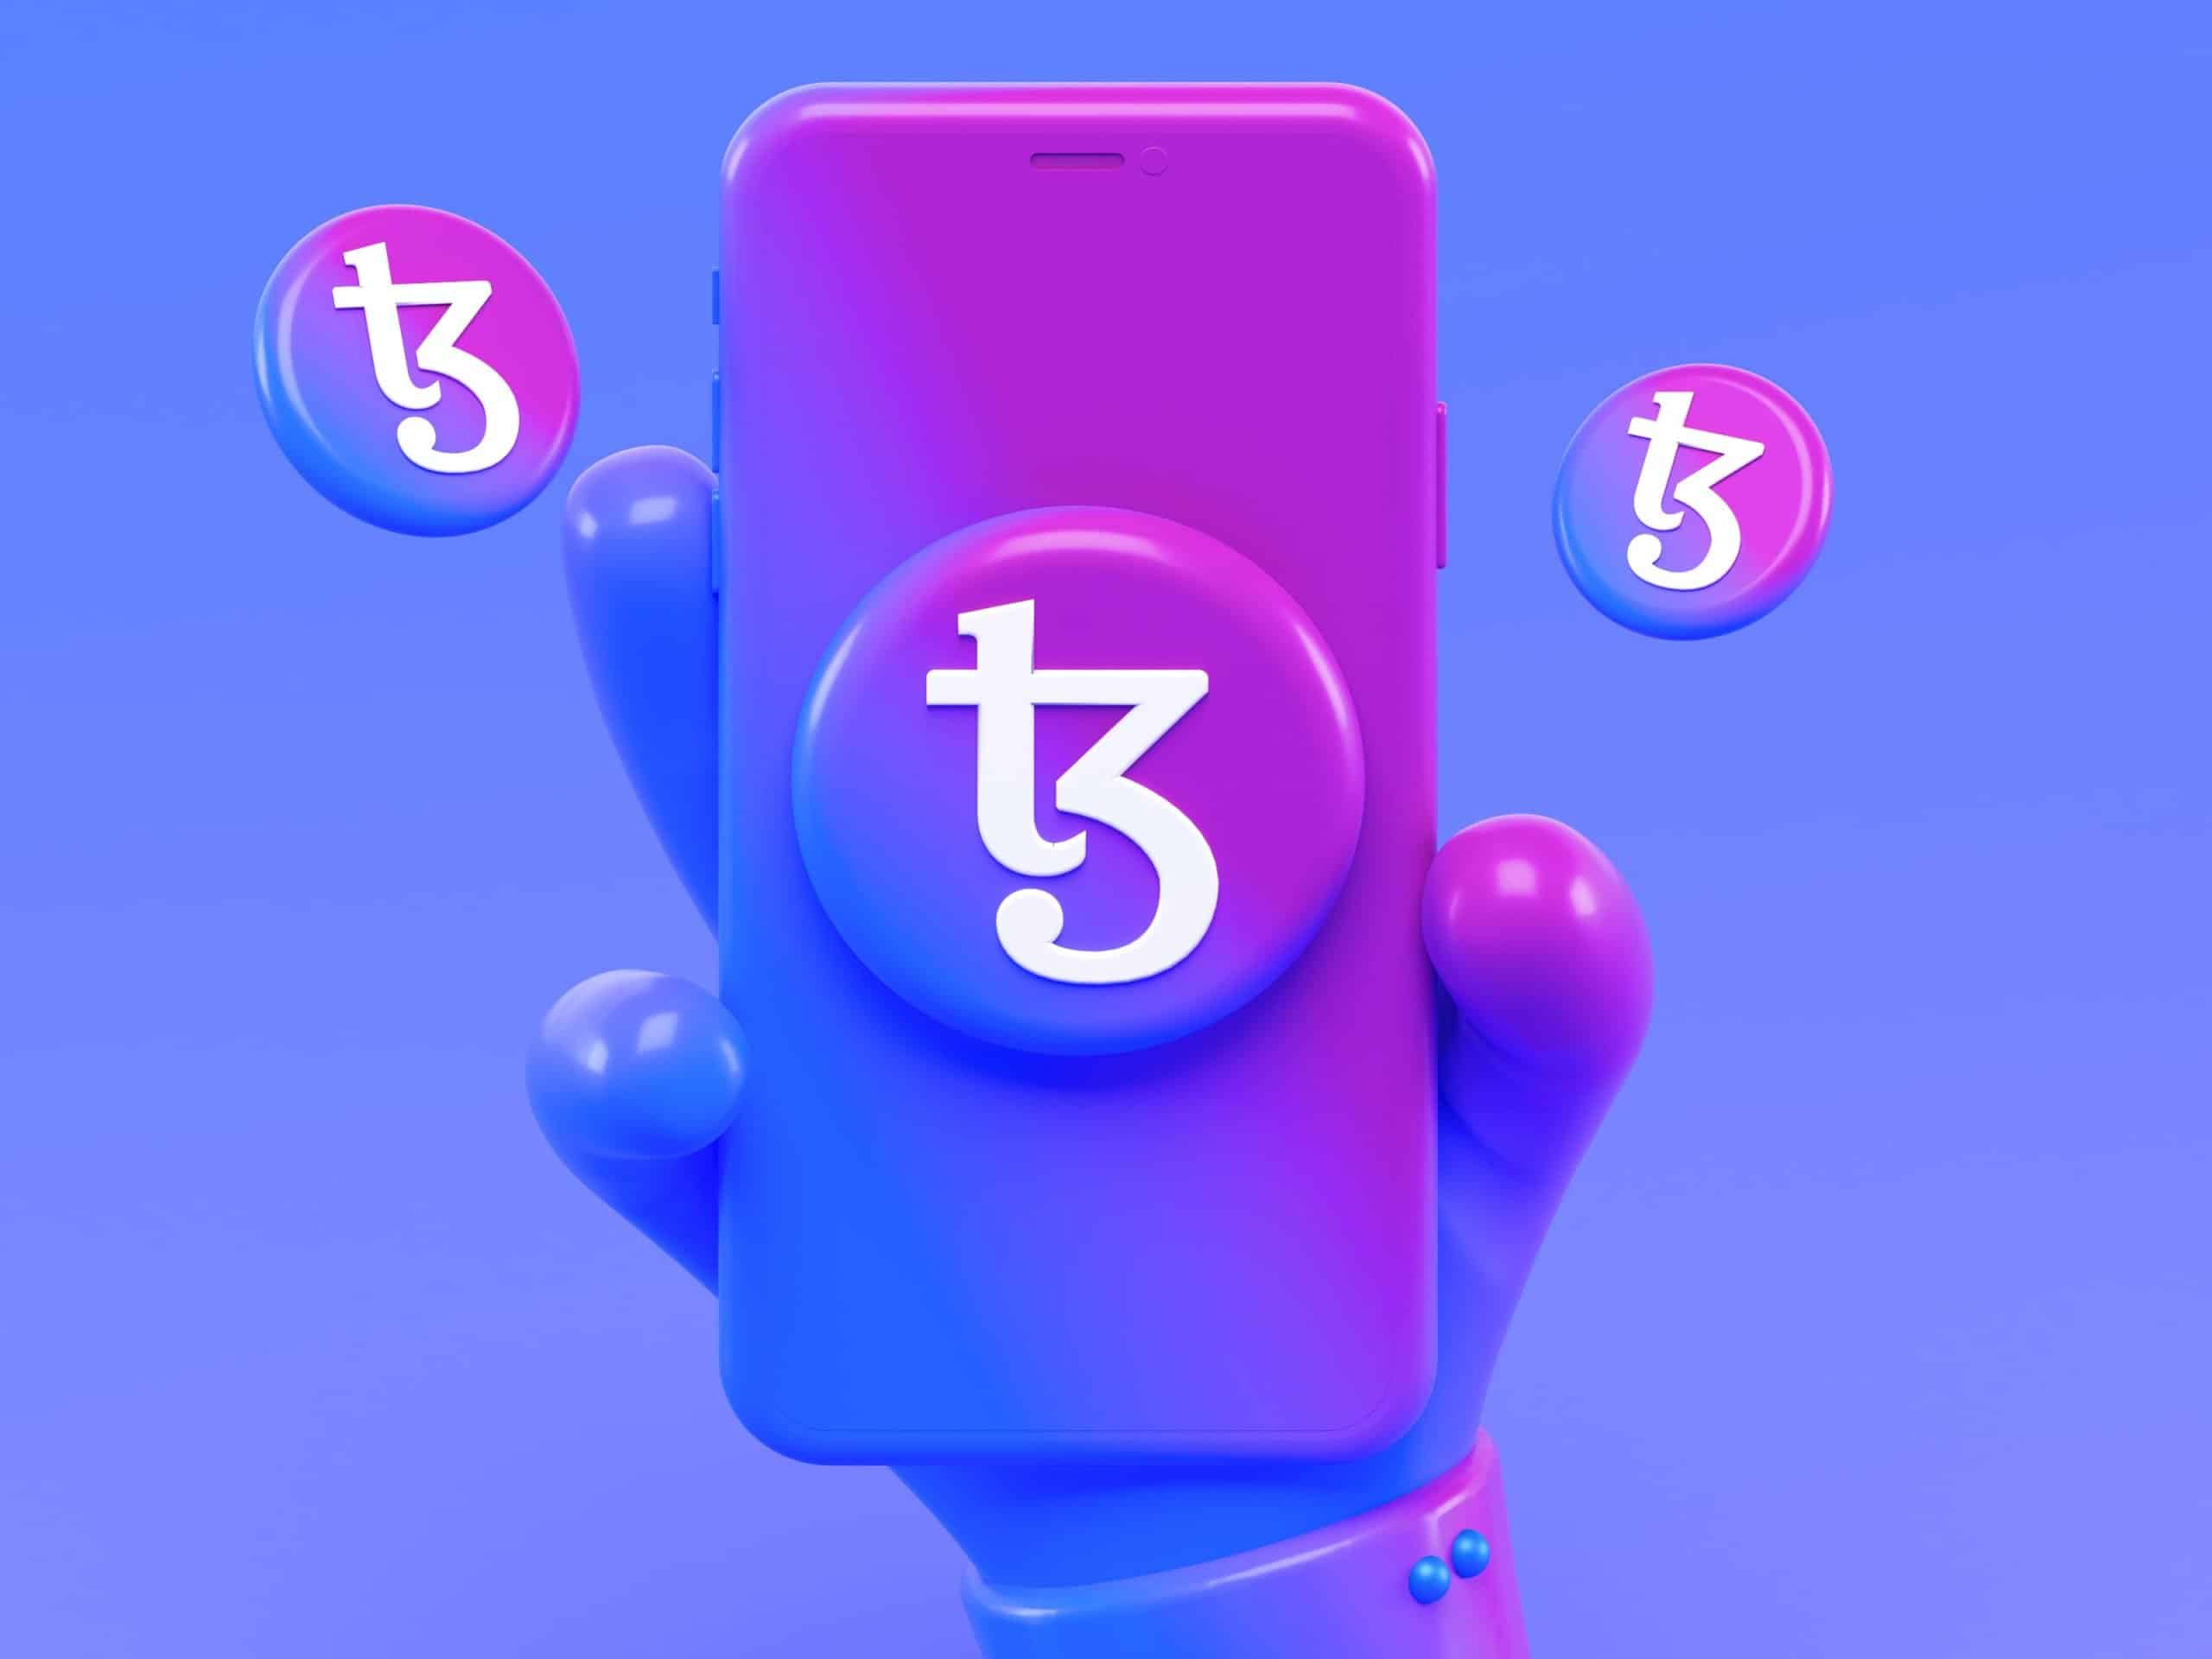 An illustration of a hand holding a phone with Tezos token